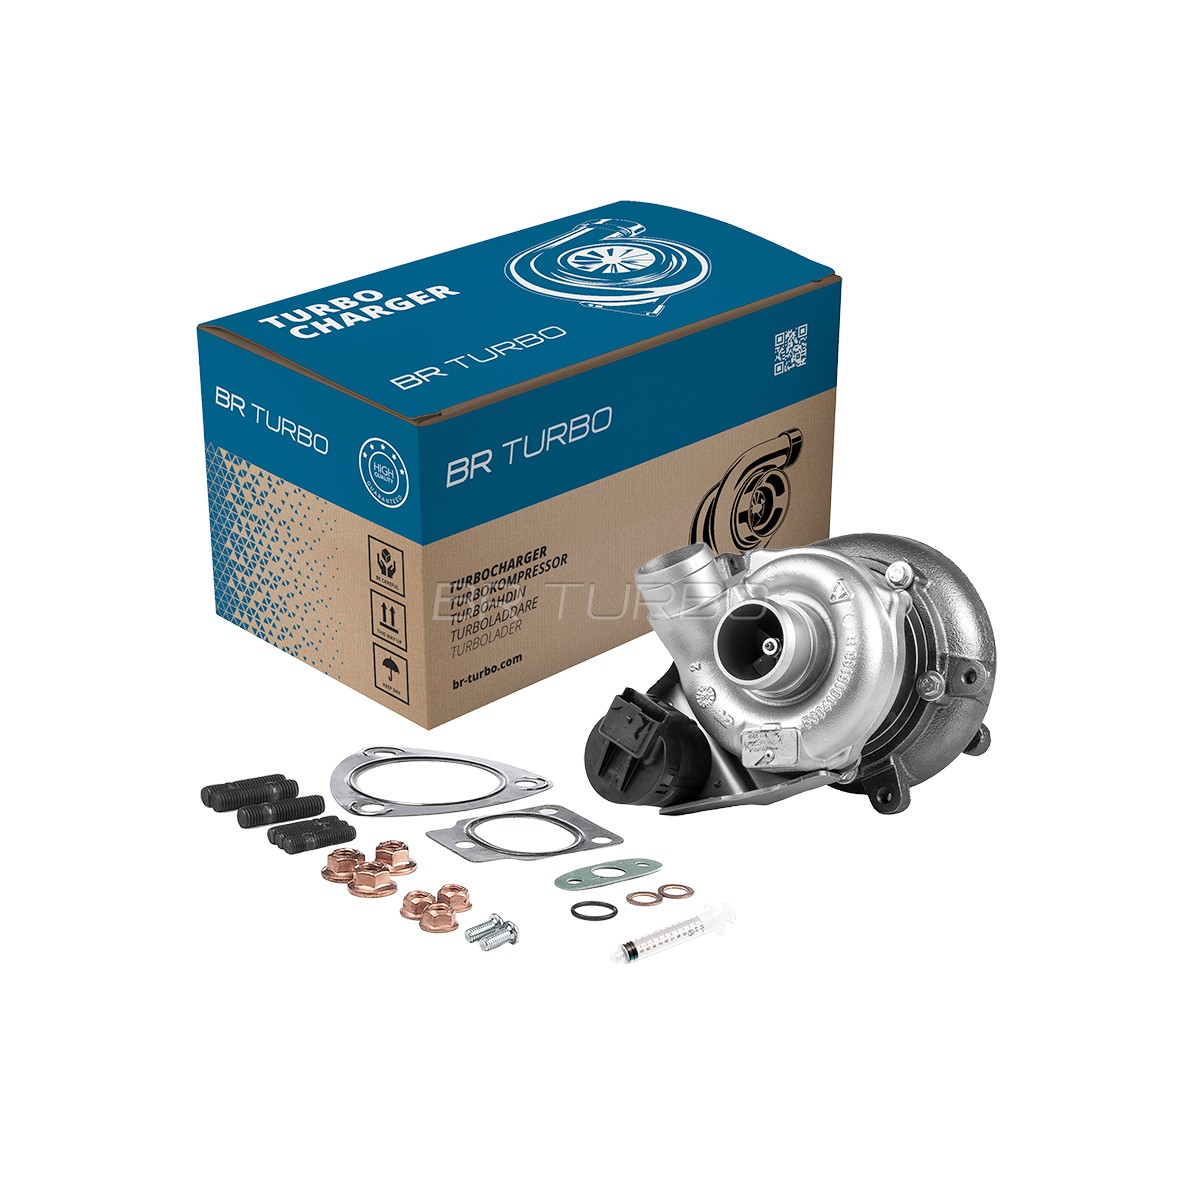 BR Turbo Turbo, with attachment material Turbo 53049880115RSM buy